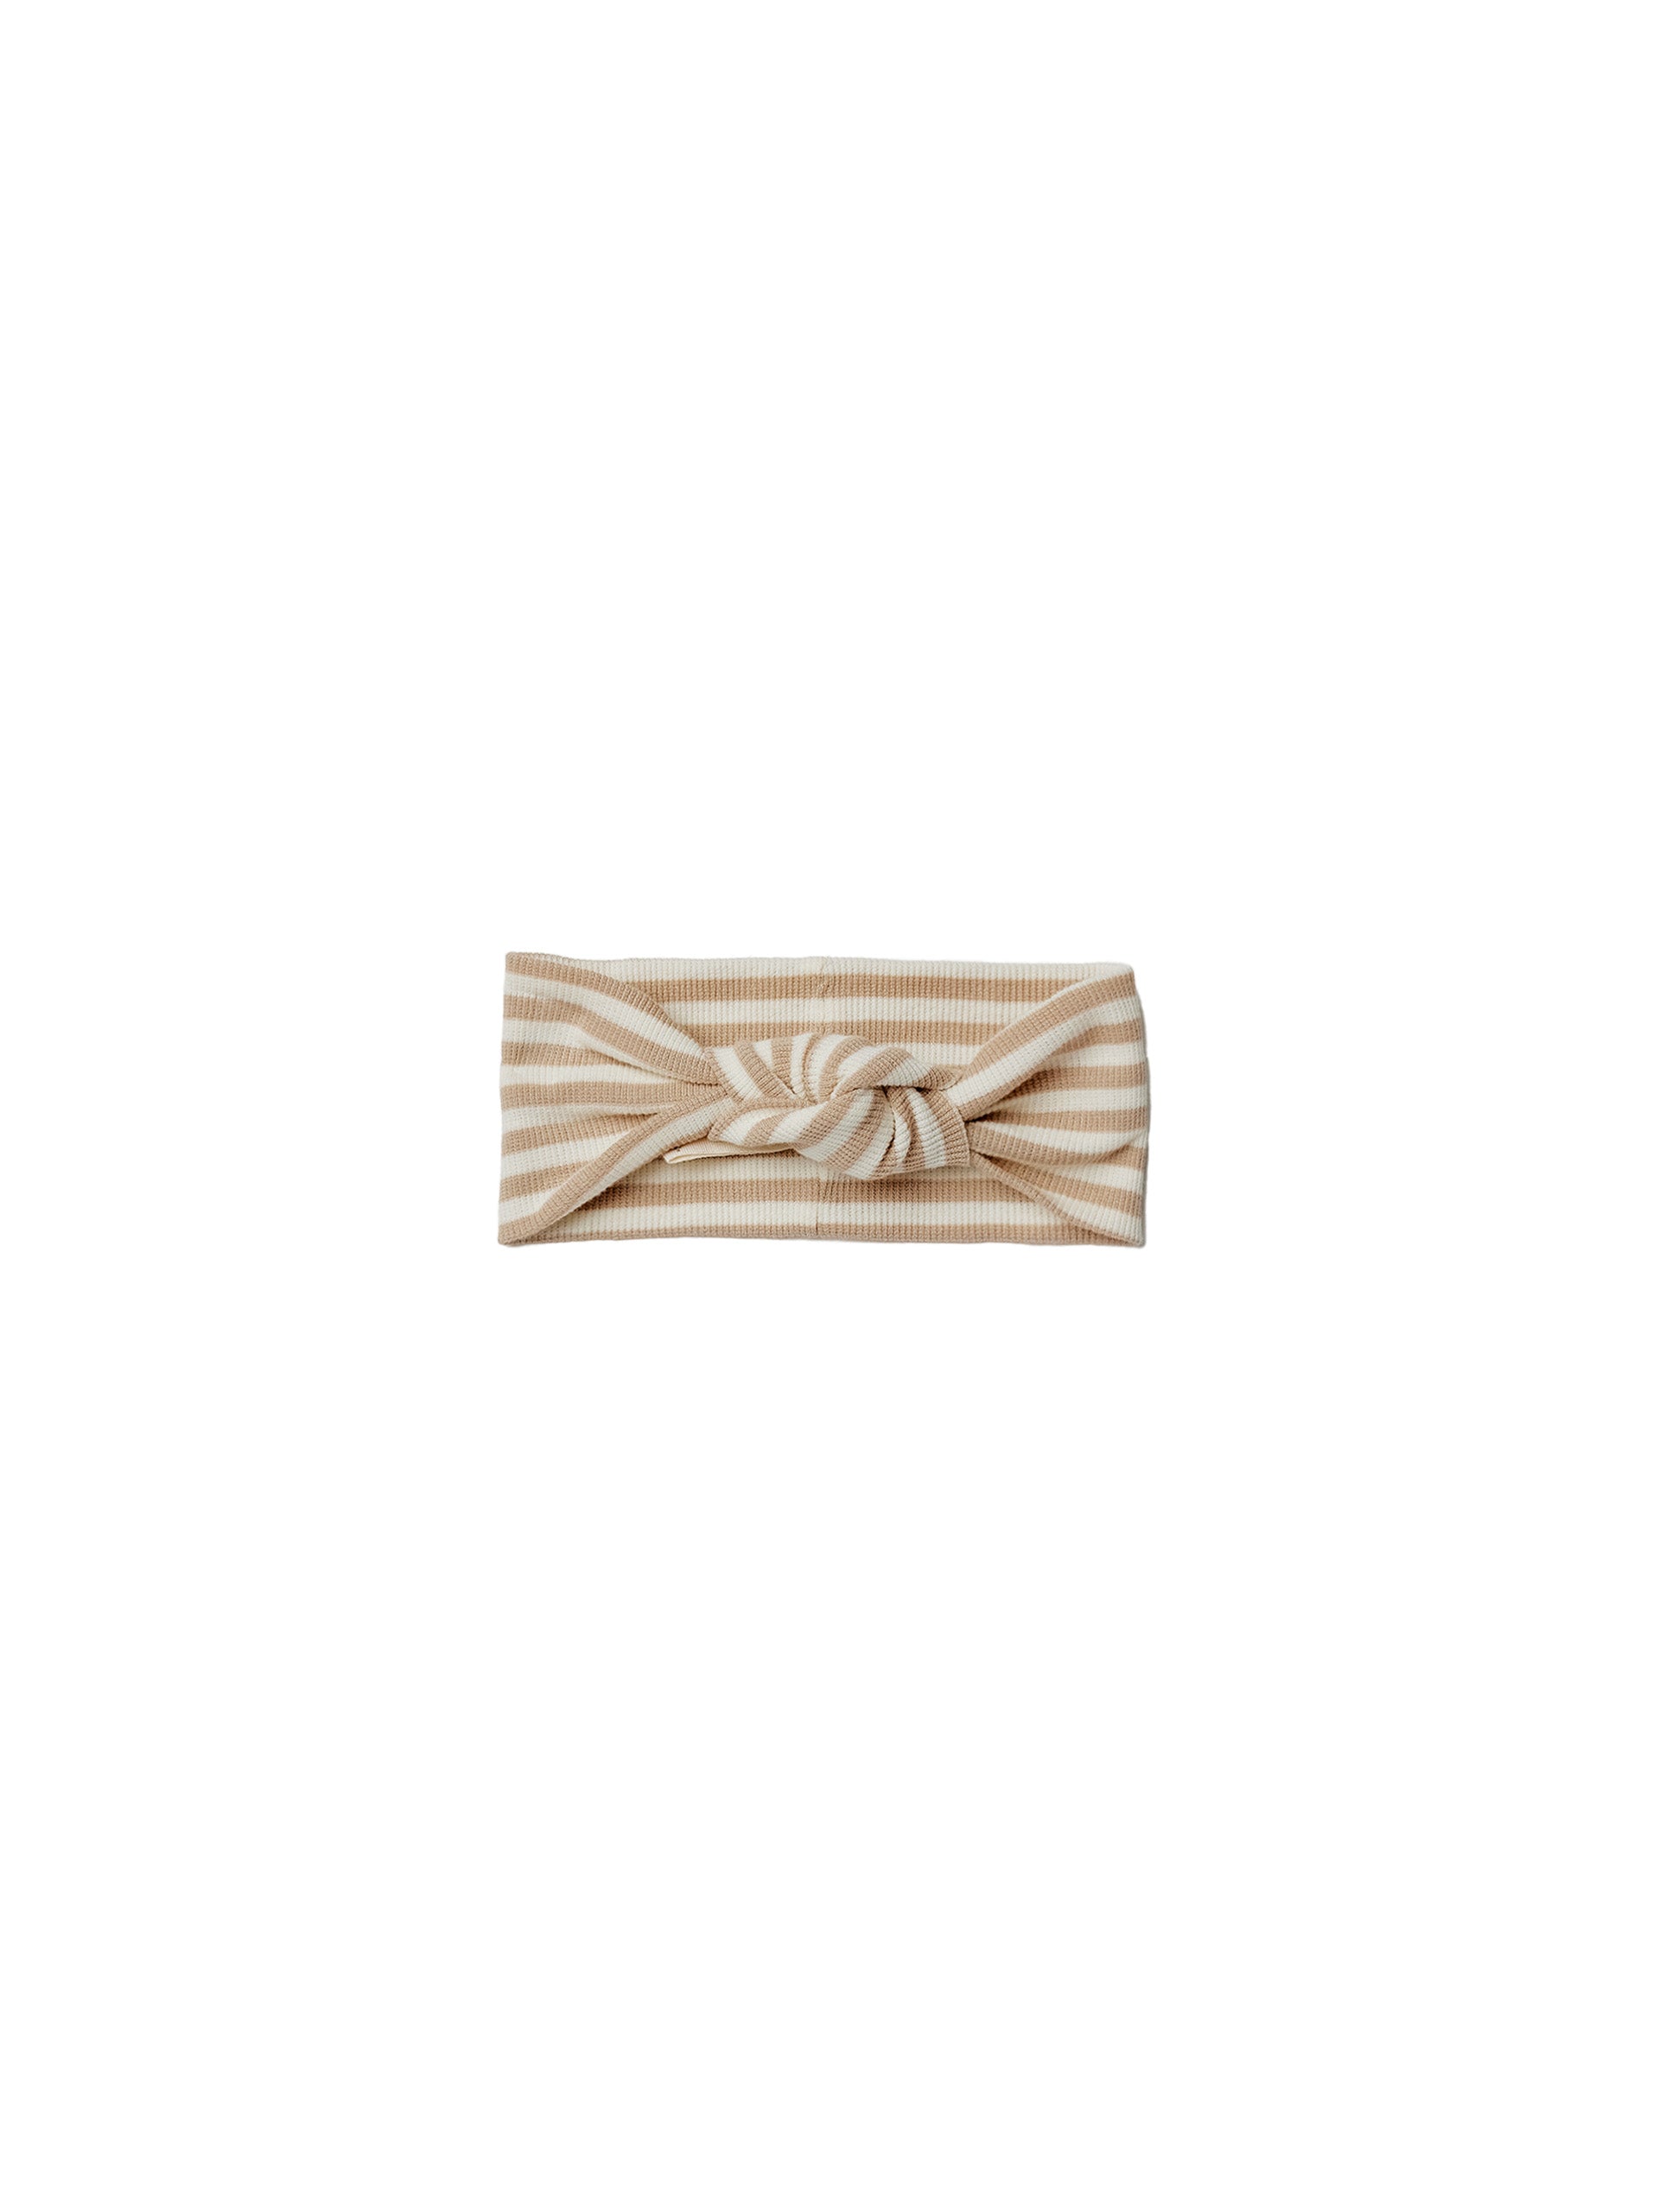 RIBBED KNOTTED HEADBAND | LATTE-STRIPE